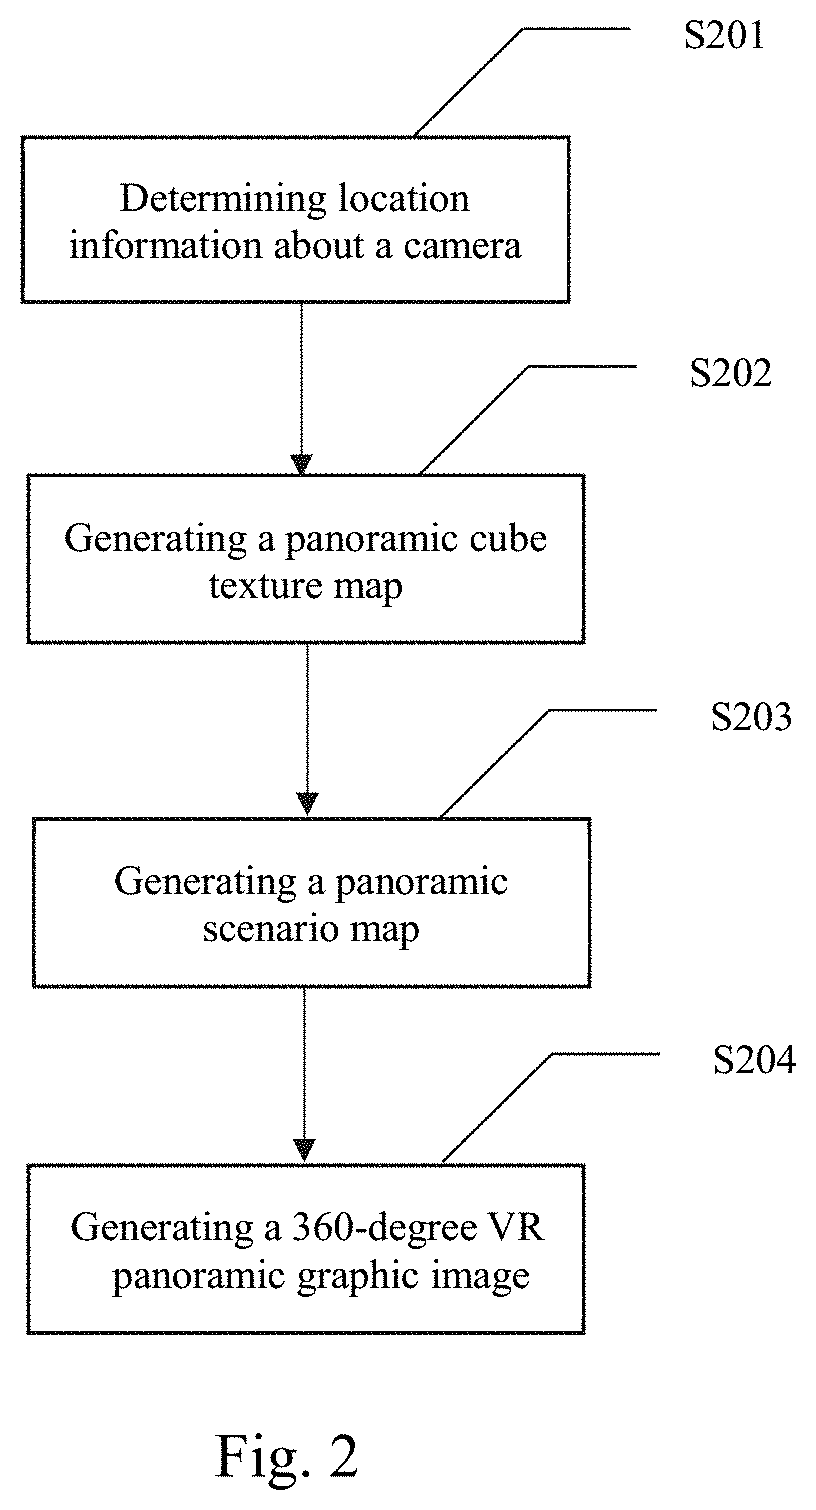 A real-time generation method for 360-degree VR panoramic graphic image and video